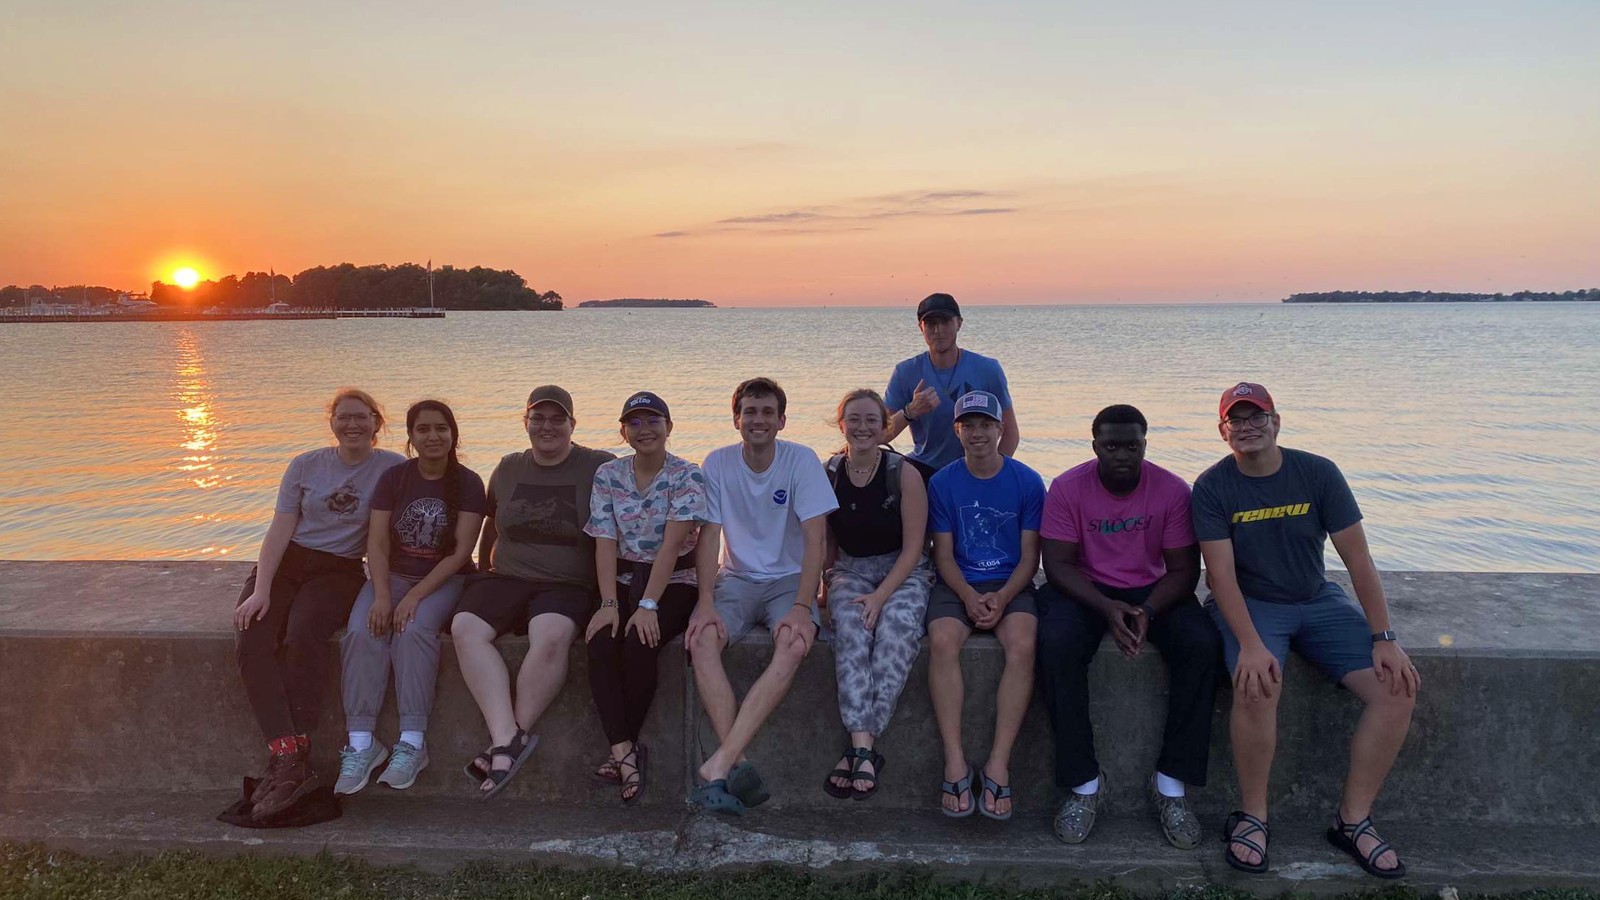 Some of the student participants in front of a Lake Erie sunset